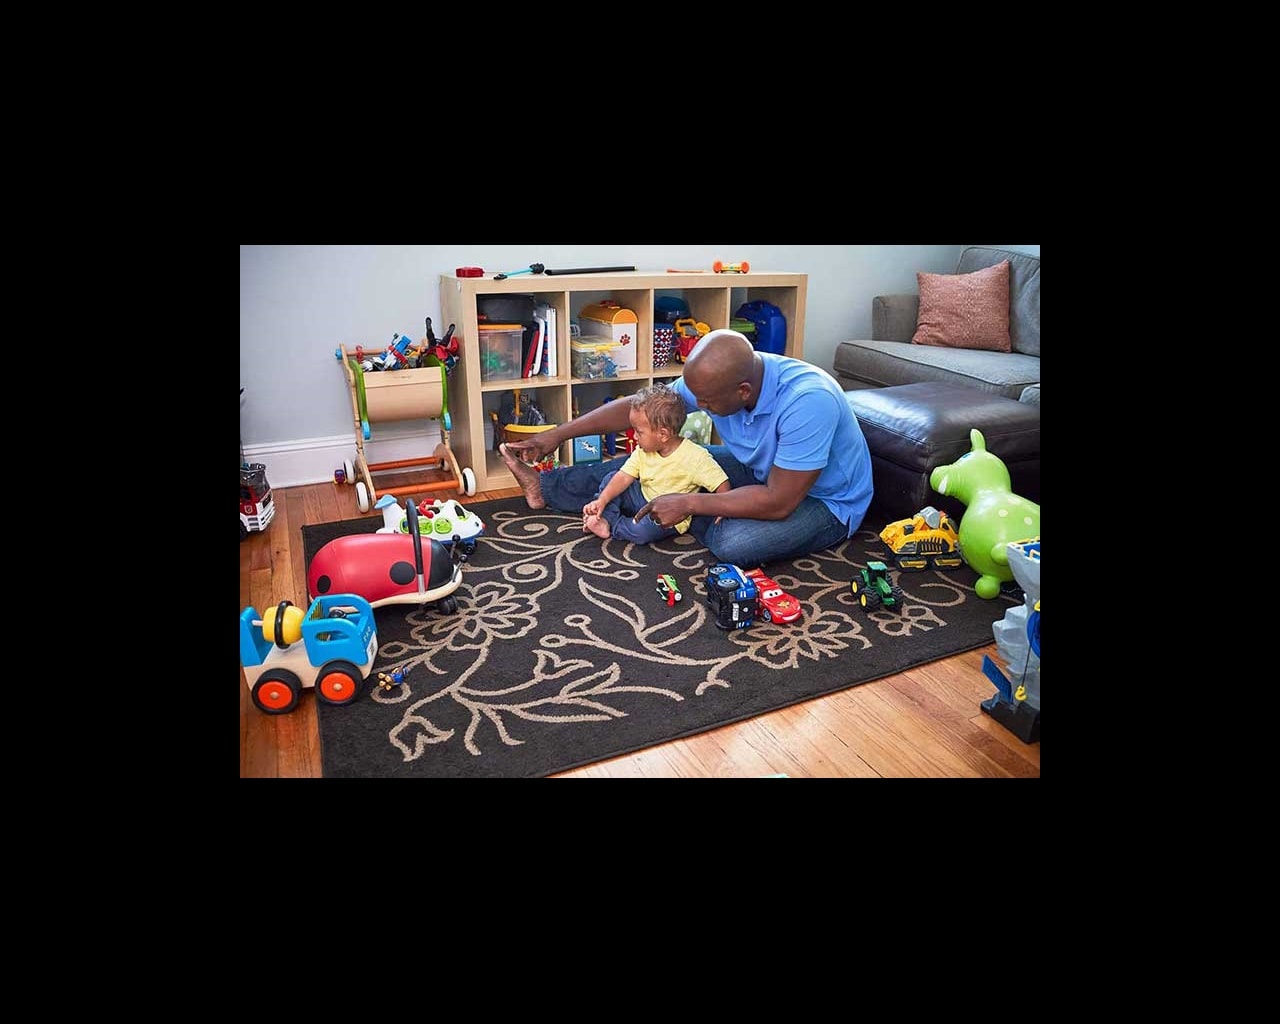 dad and son playing in toy room